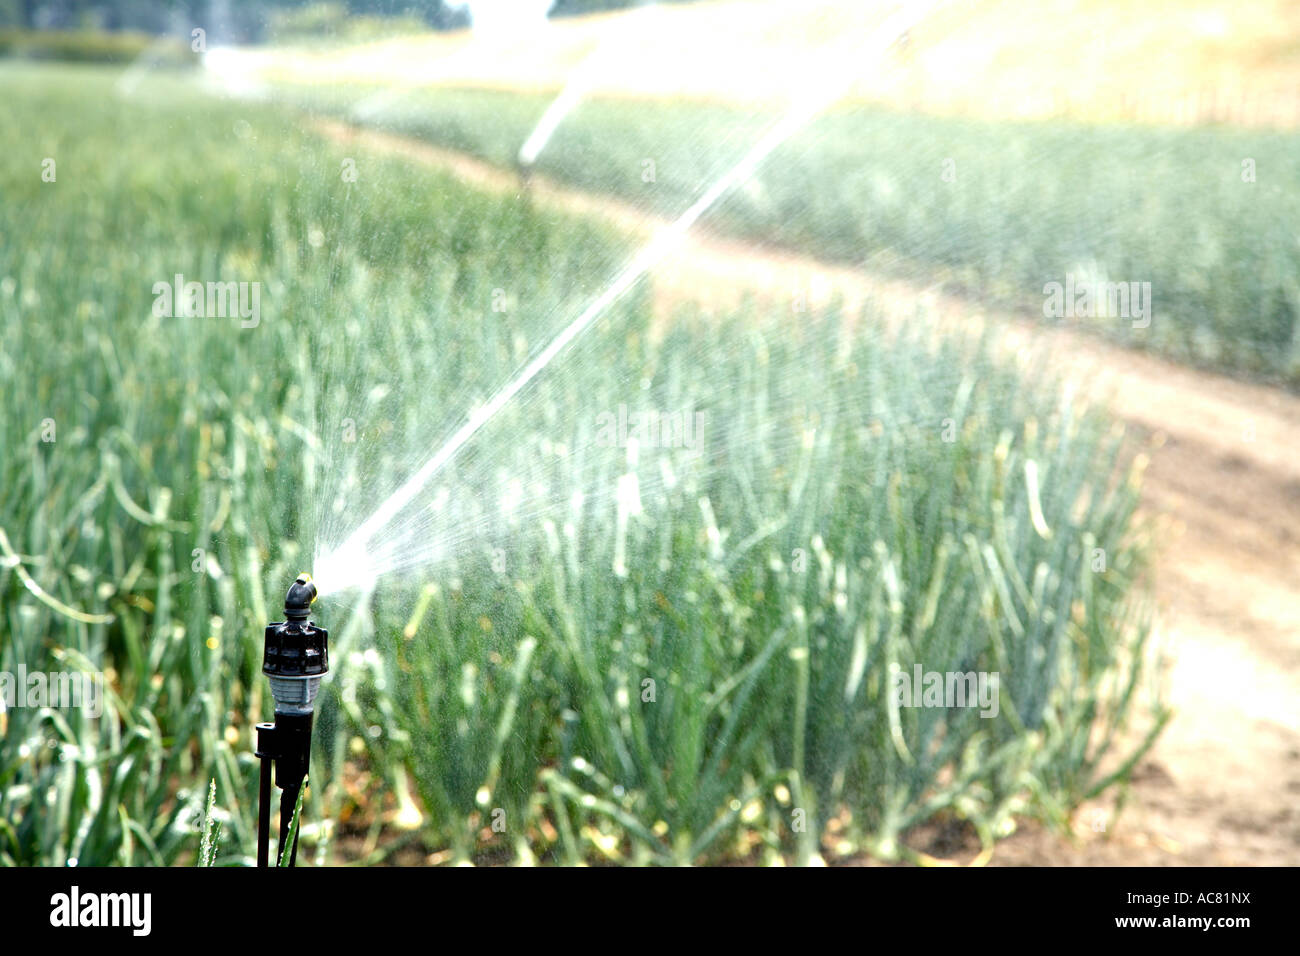 irrigation system at work watering crop Stock Photo